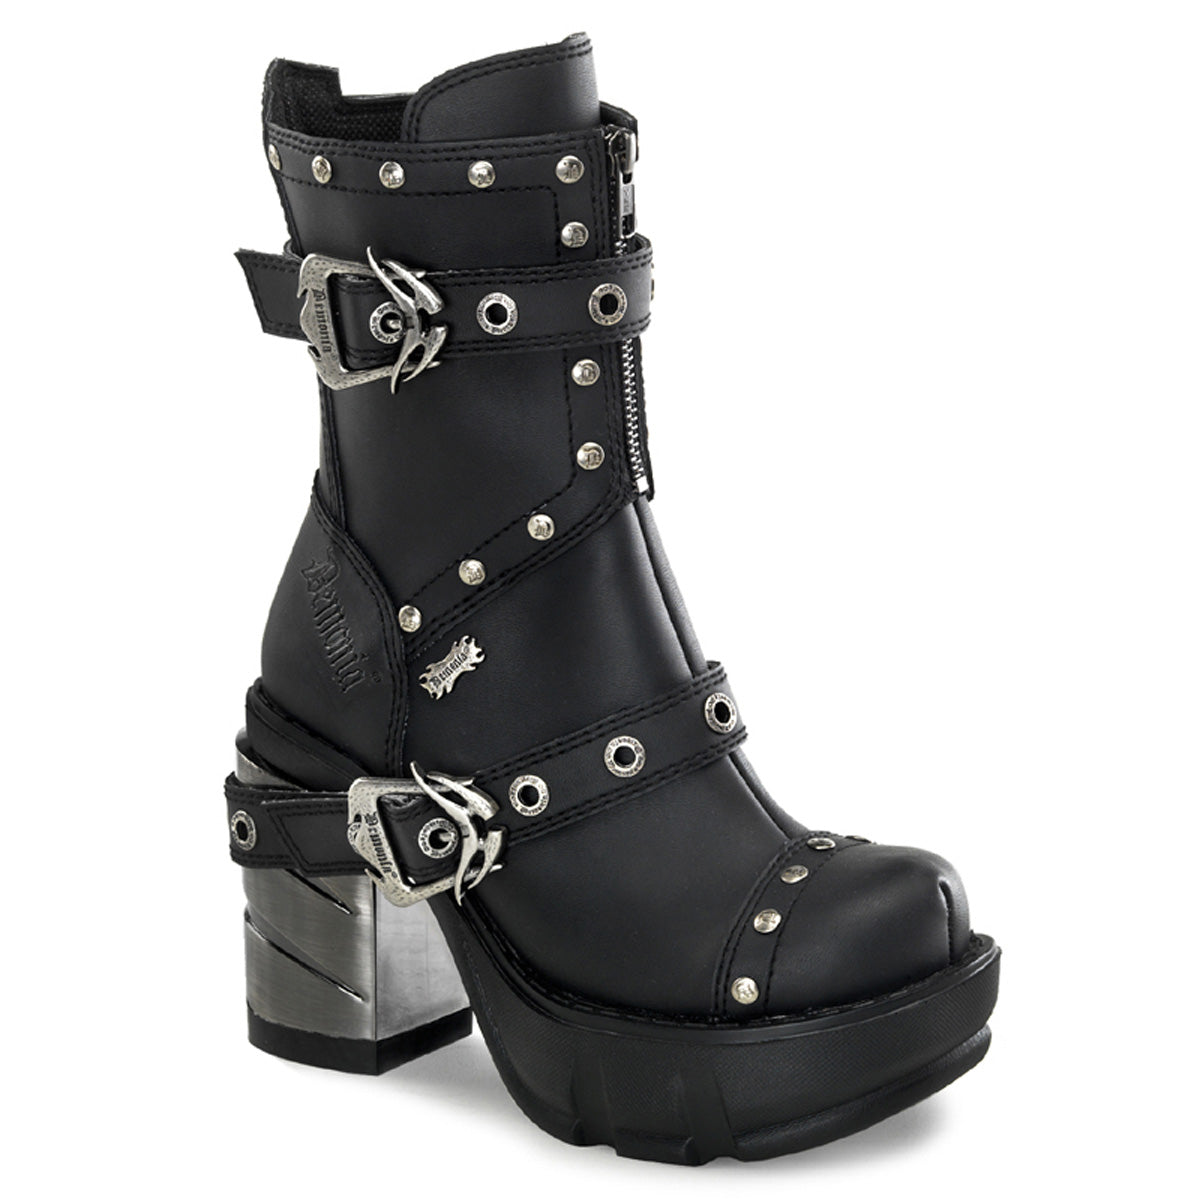 DemoniaCult Womens Boots SINISTER-201 Blk Vegan Leather